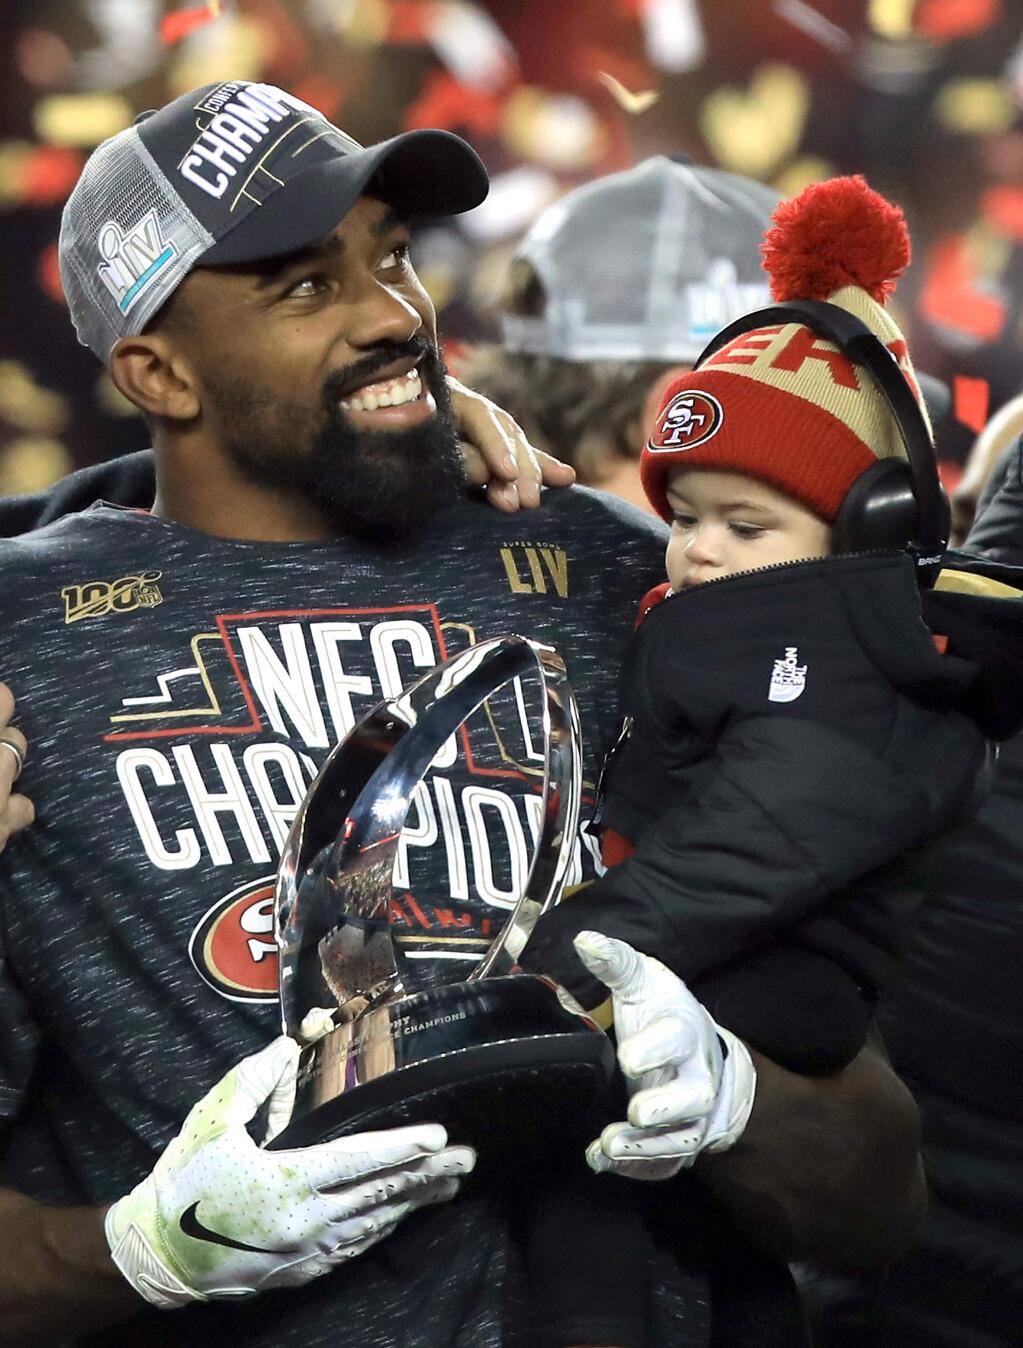 Raheem Mostert celebrates with his son Gunner with the George Halas trophy after San Francisco's 37-20 win over Green Bay in the NFC Championship game, Sunday, January 19, 2020 in Santa Clara. (Kent Porter / The Press Democrat) 2020